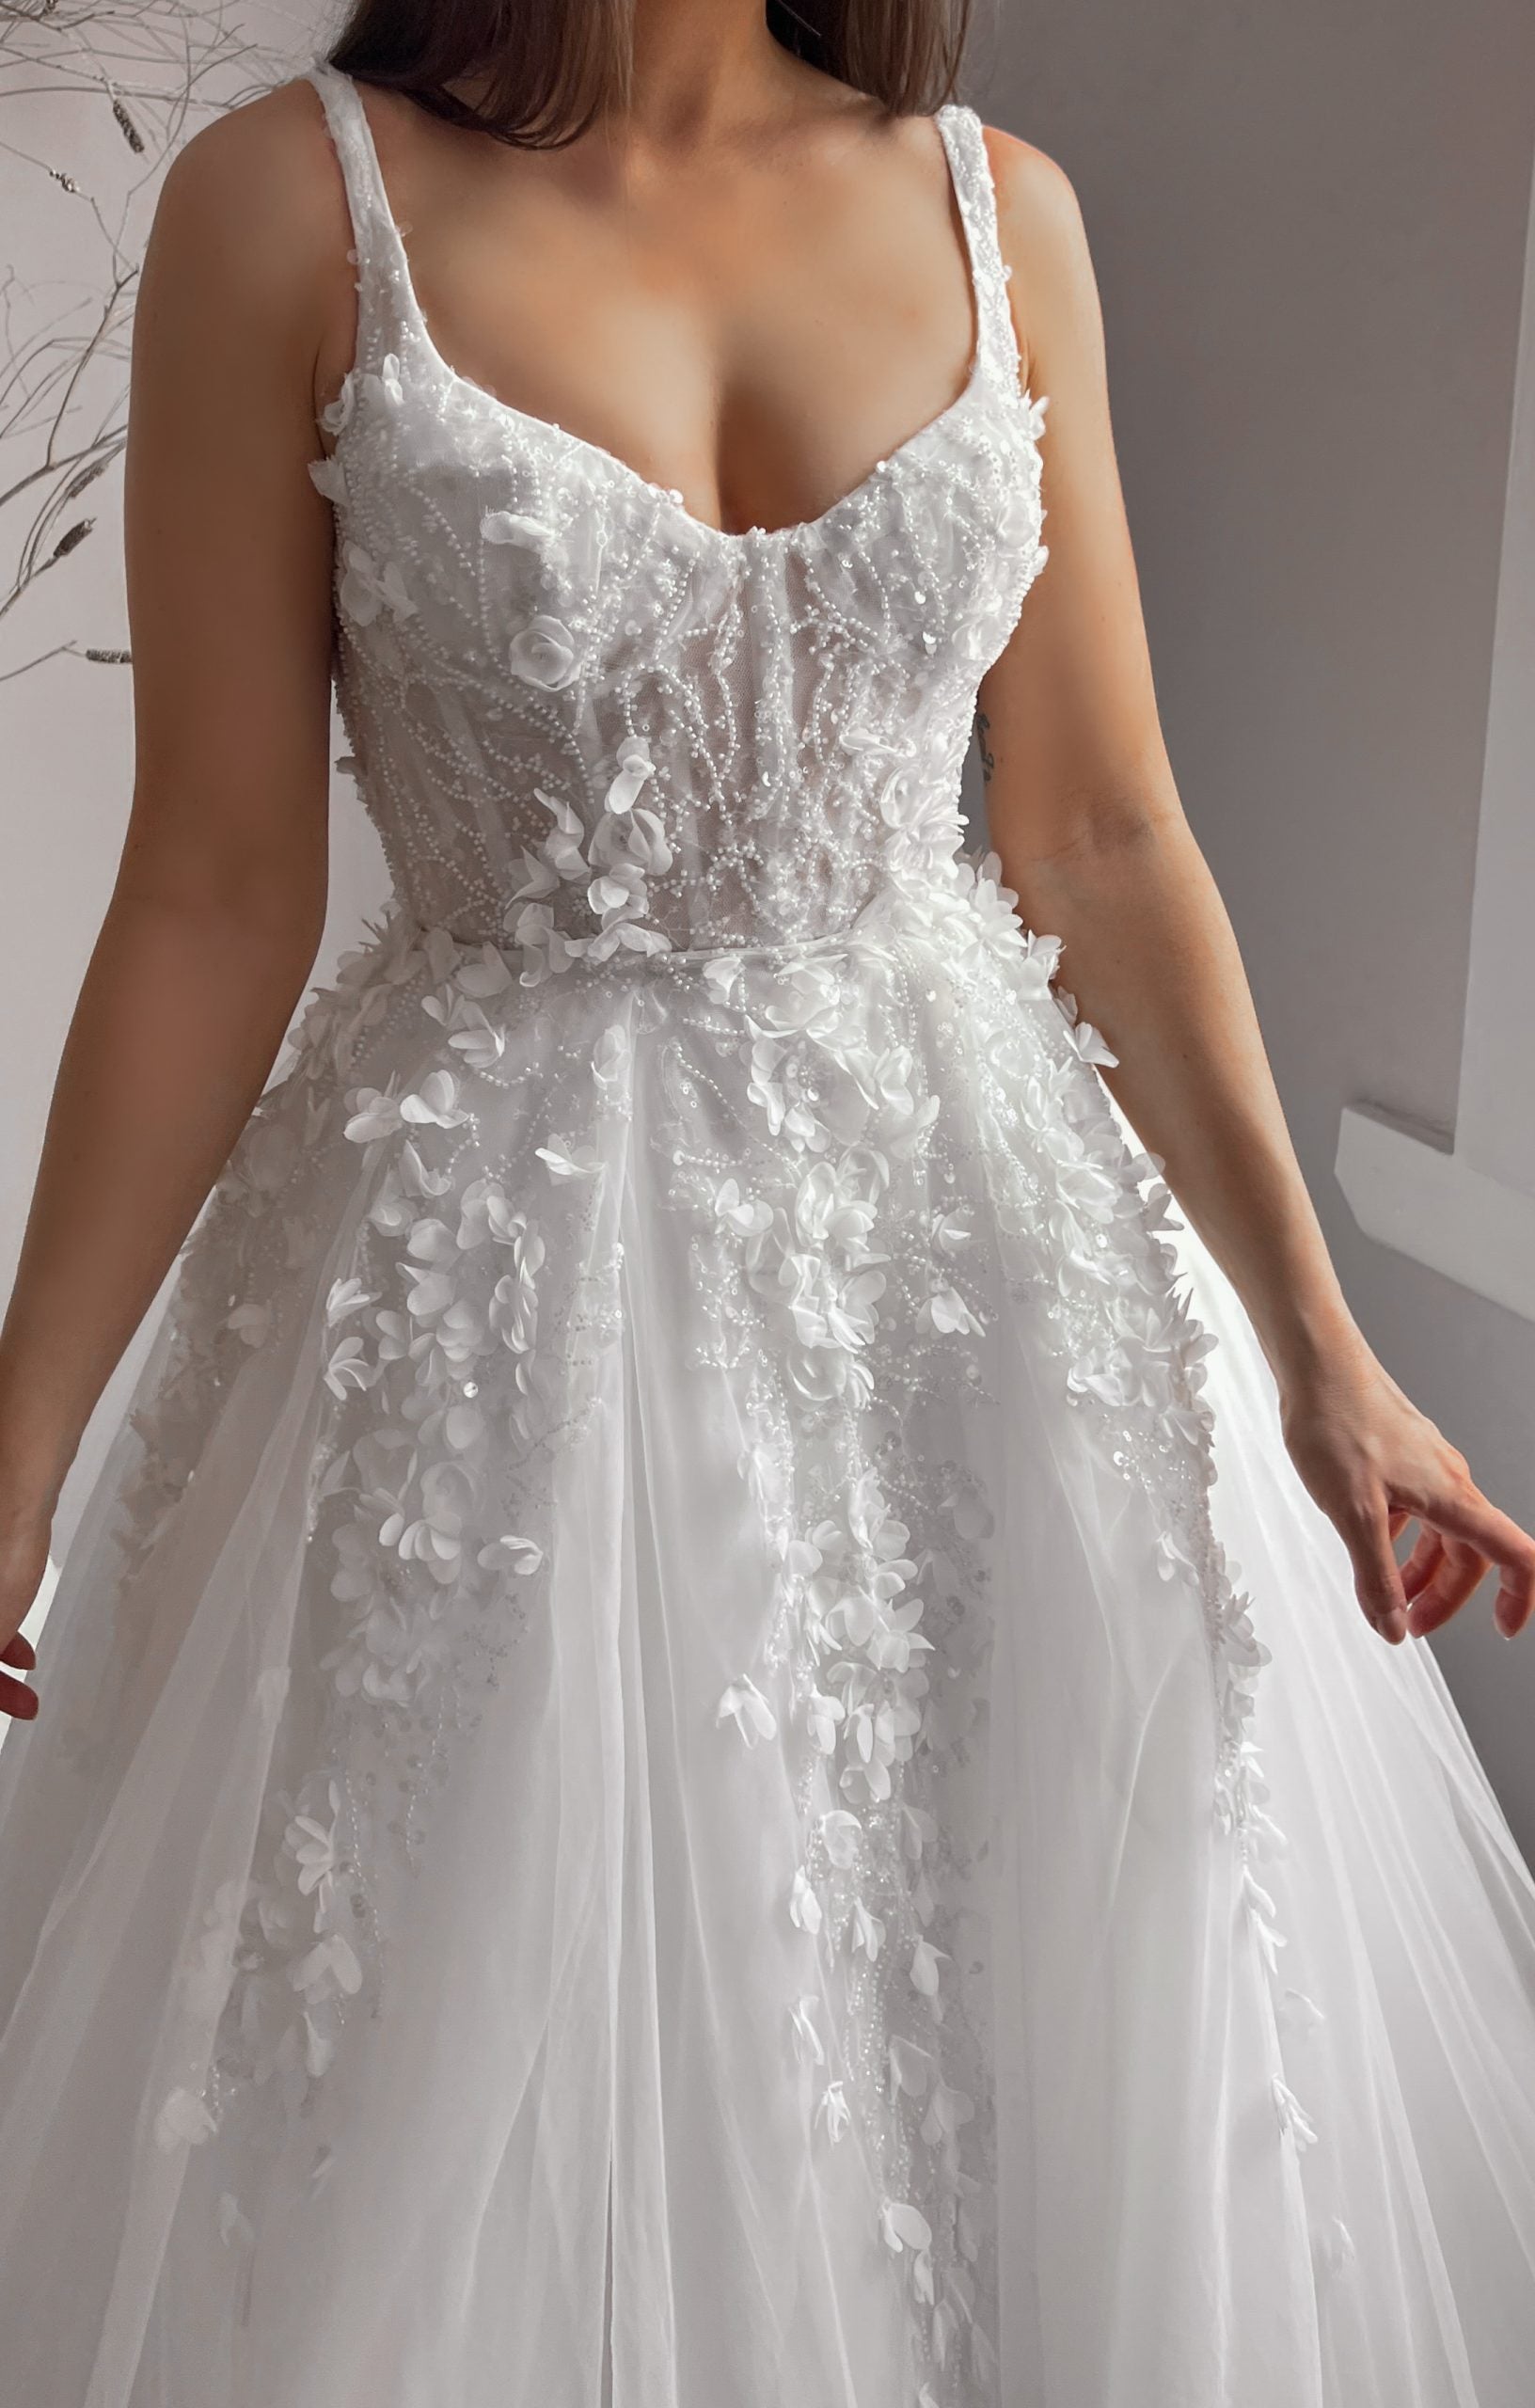 Chic And Romantic Fit-and-Flare Gown by Blanche Bridal - Image 3